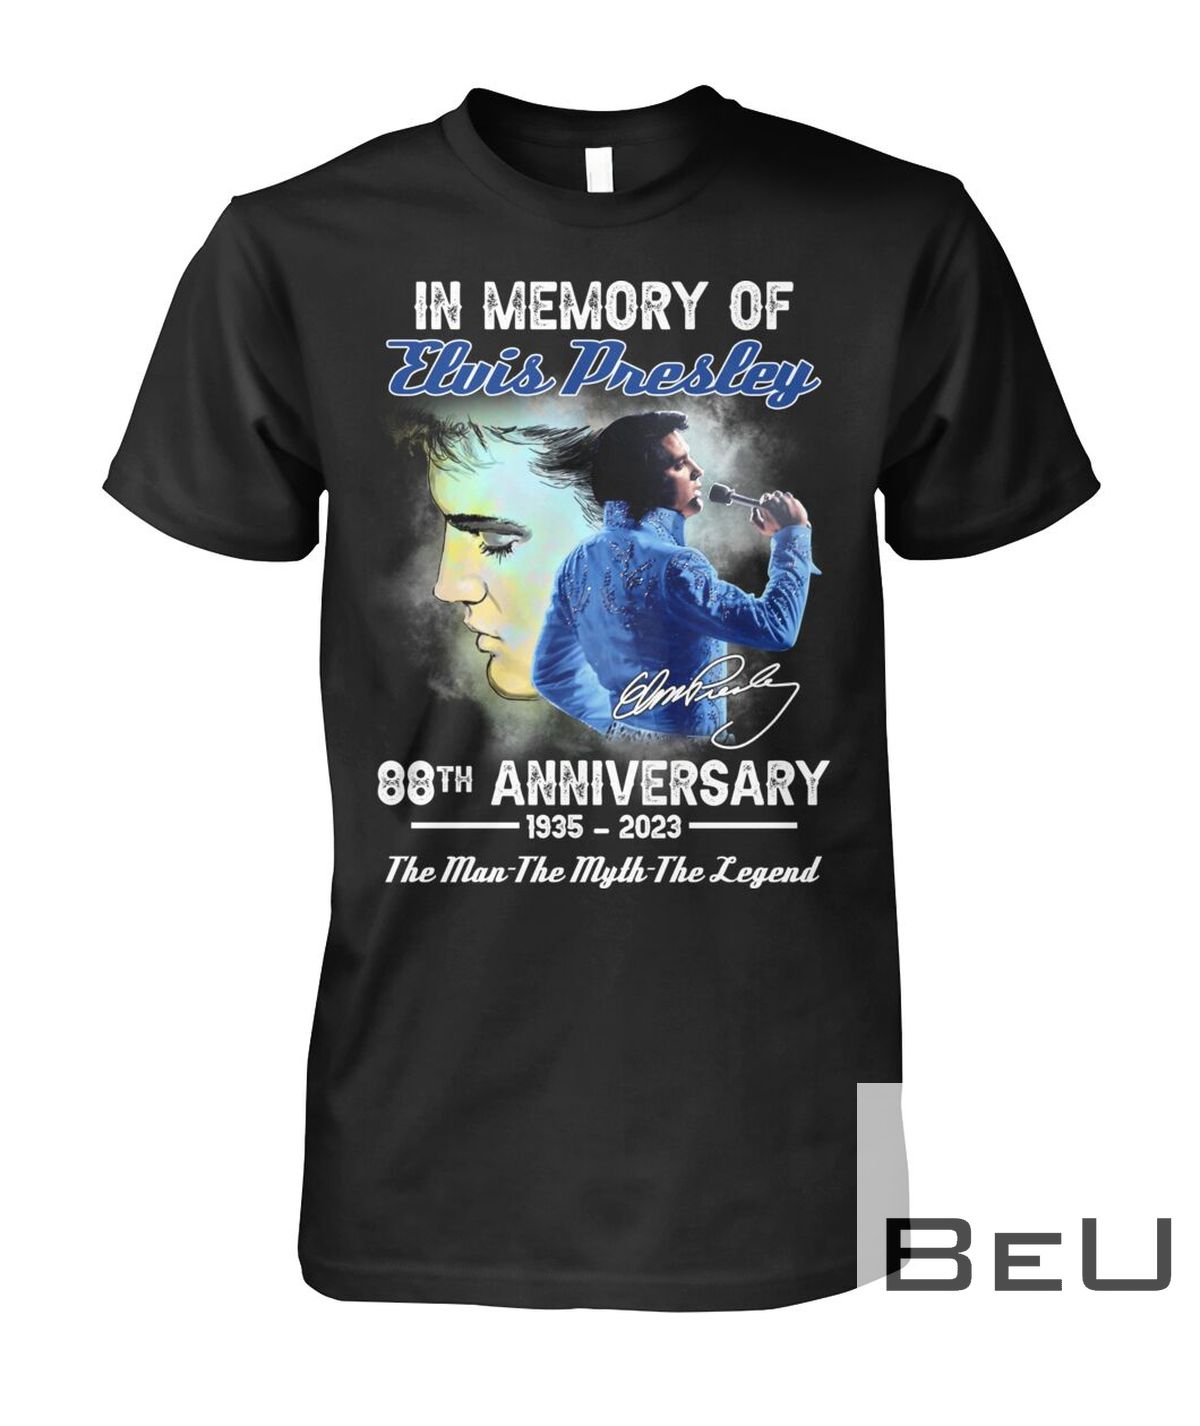 In Memory Of Elvis Presley 88th Anniversary 1935-2023 The Man The Myth The Legend Signature Shirt